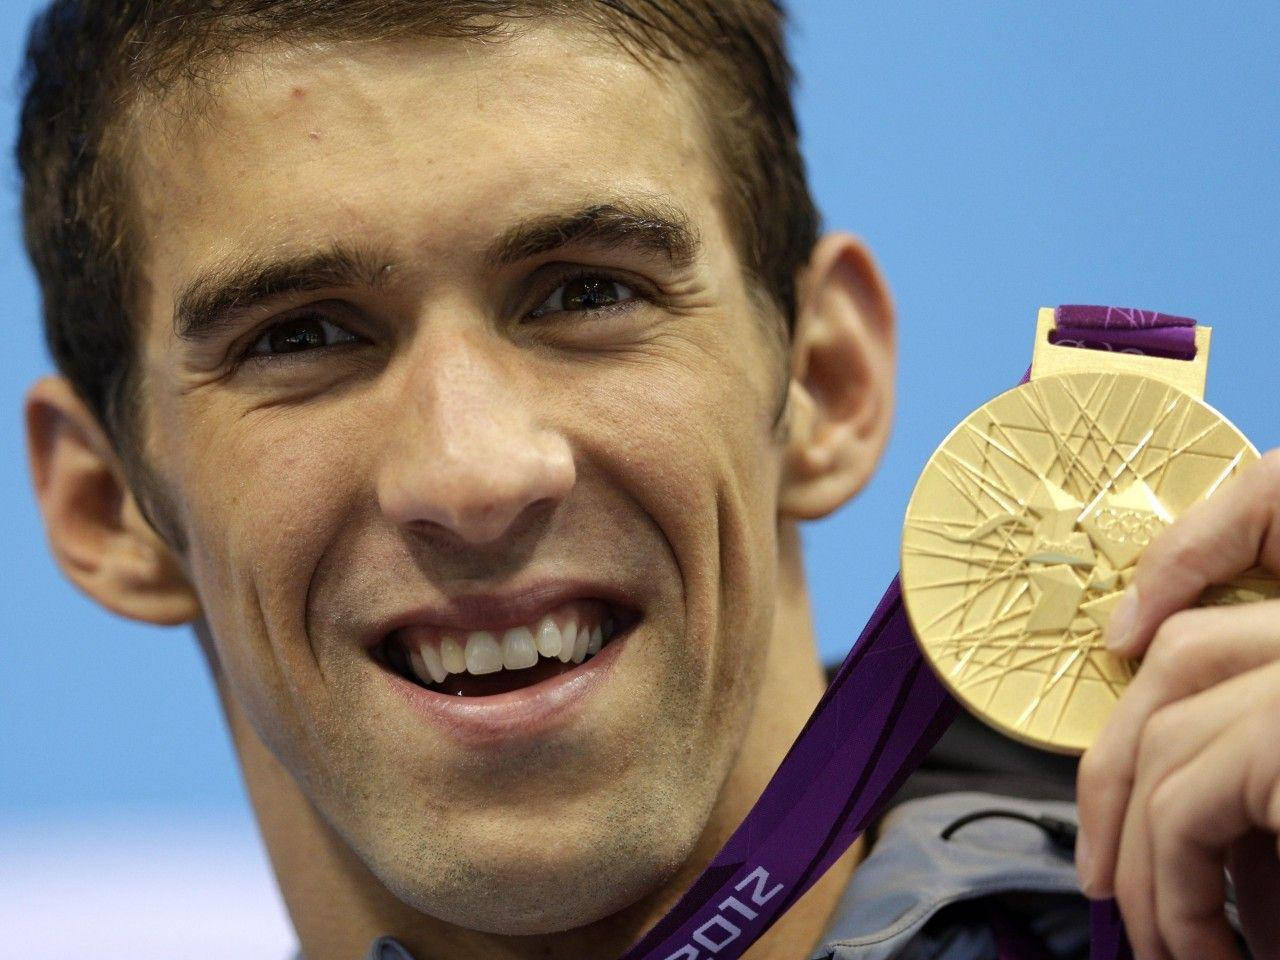 Michael Phelps As A Winner Background